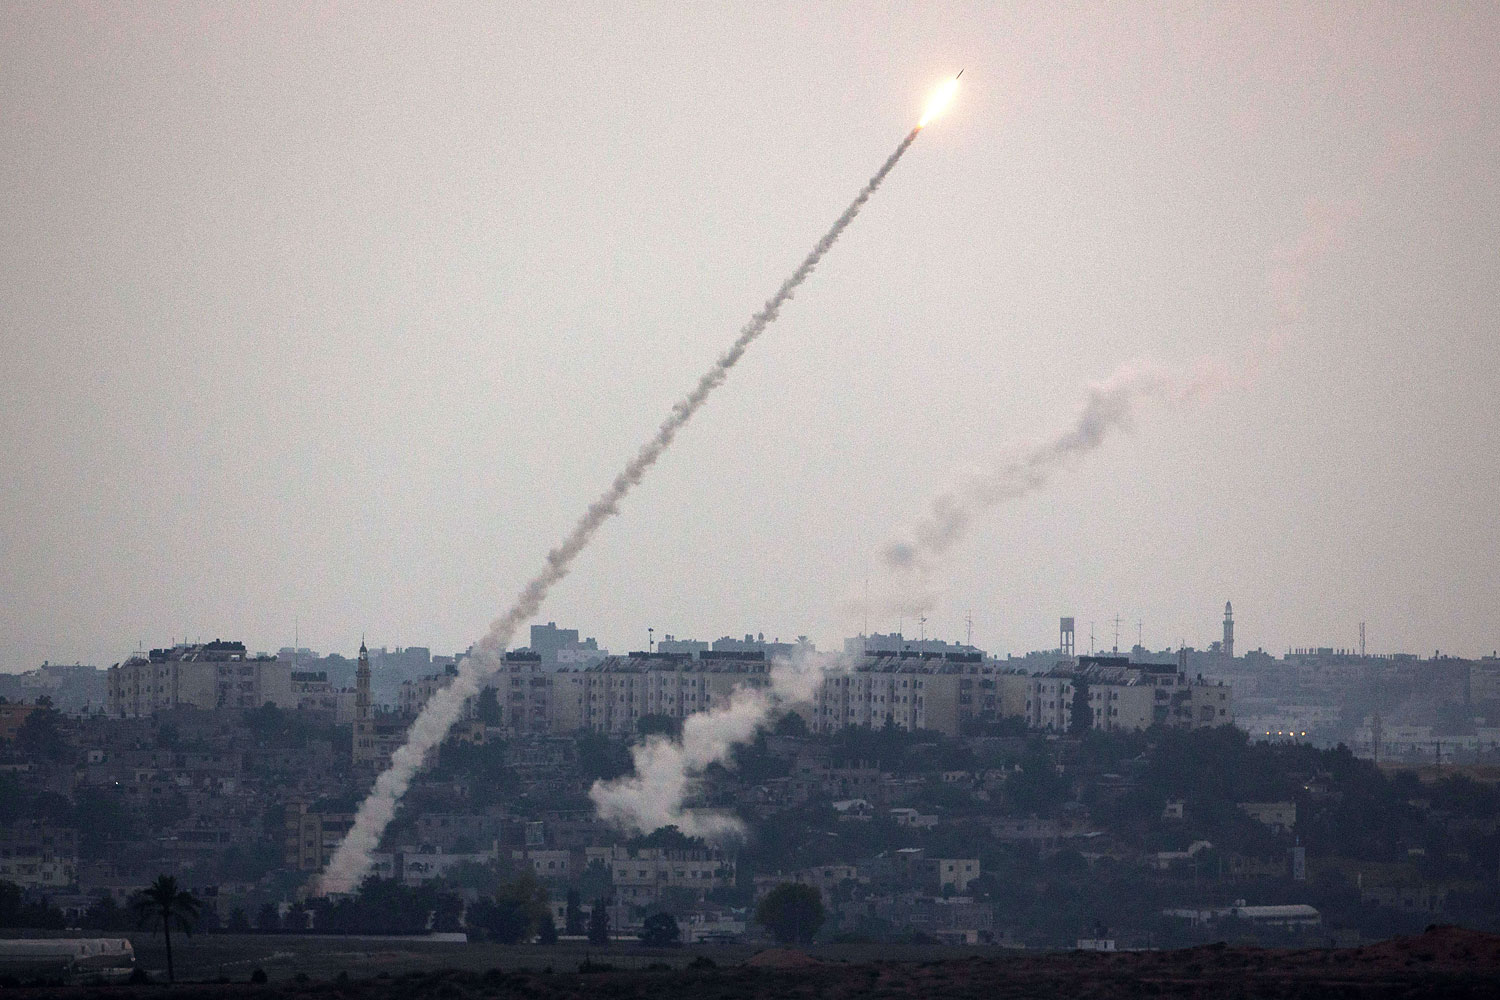 A picture taken from the southern Israeli Gaza border shows a militant rocket being launched from the Gaza strip into Israel, on July 11, 2014. (Menahem Kahana—AFP/Getty Images)